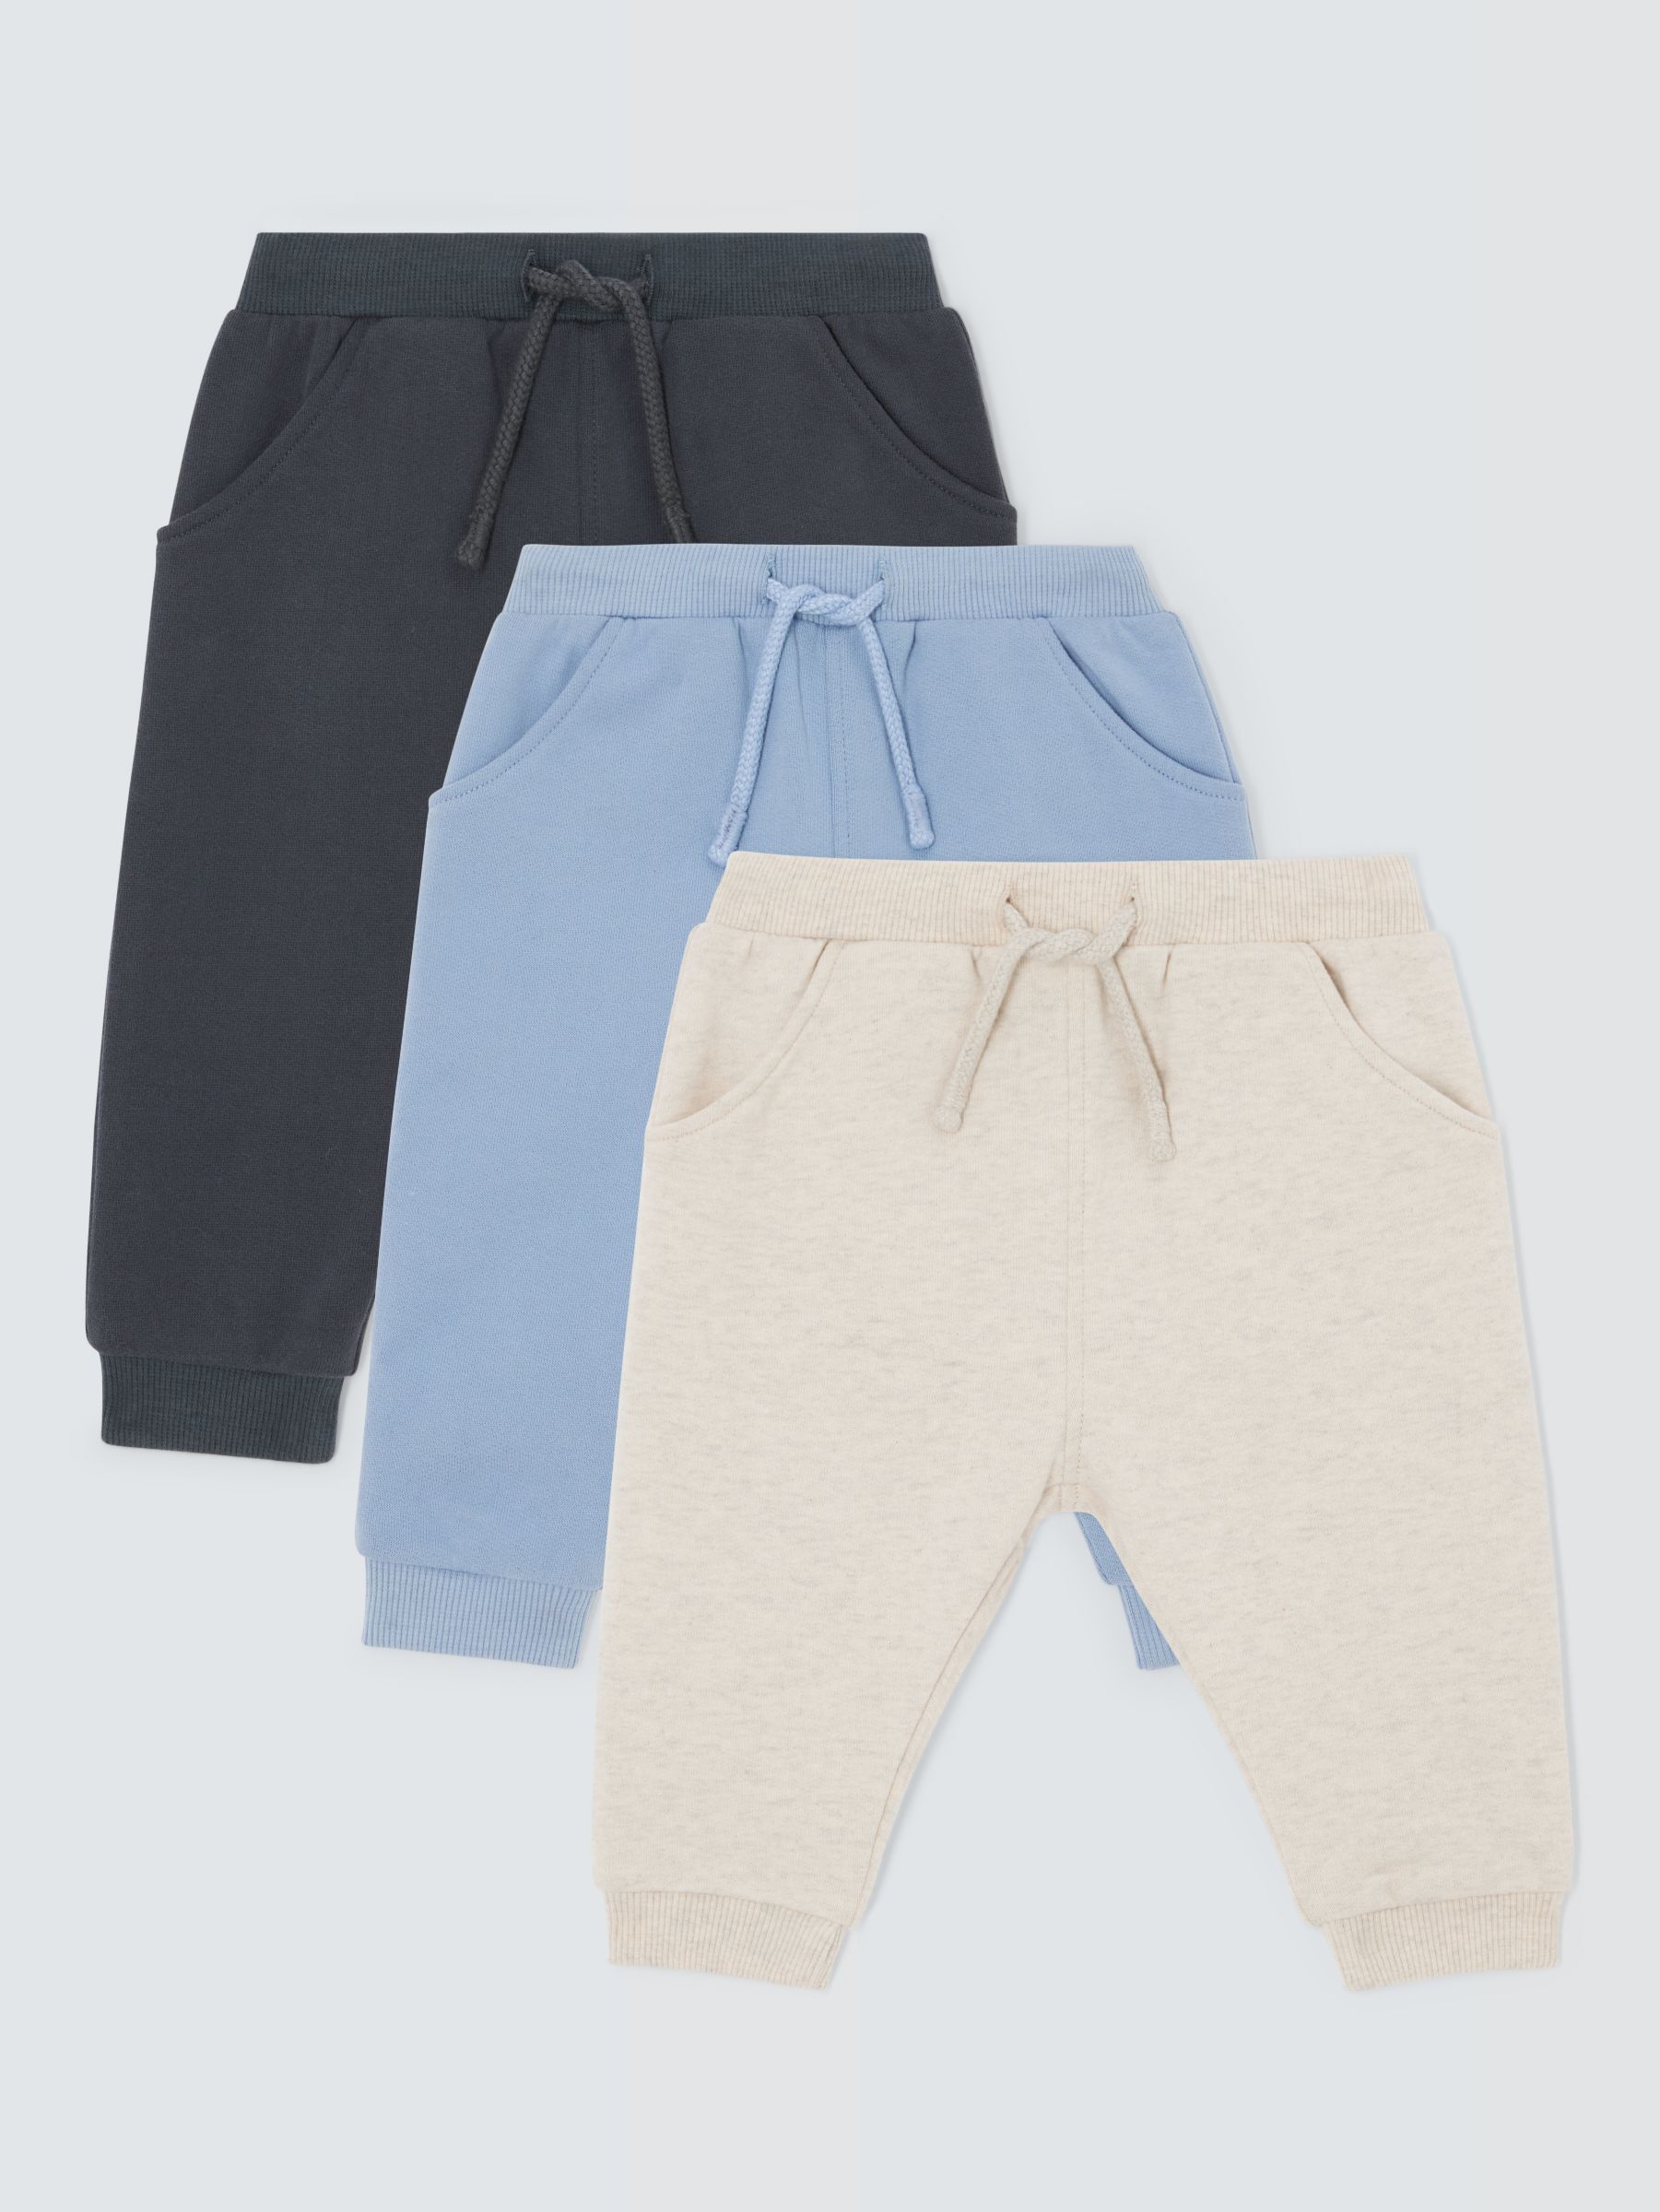 John Lewis Baby Plain Joggers, Pack of 3, Multi, 6-9 months